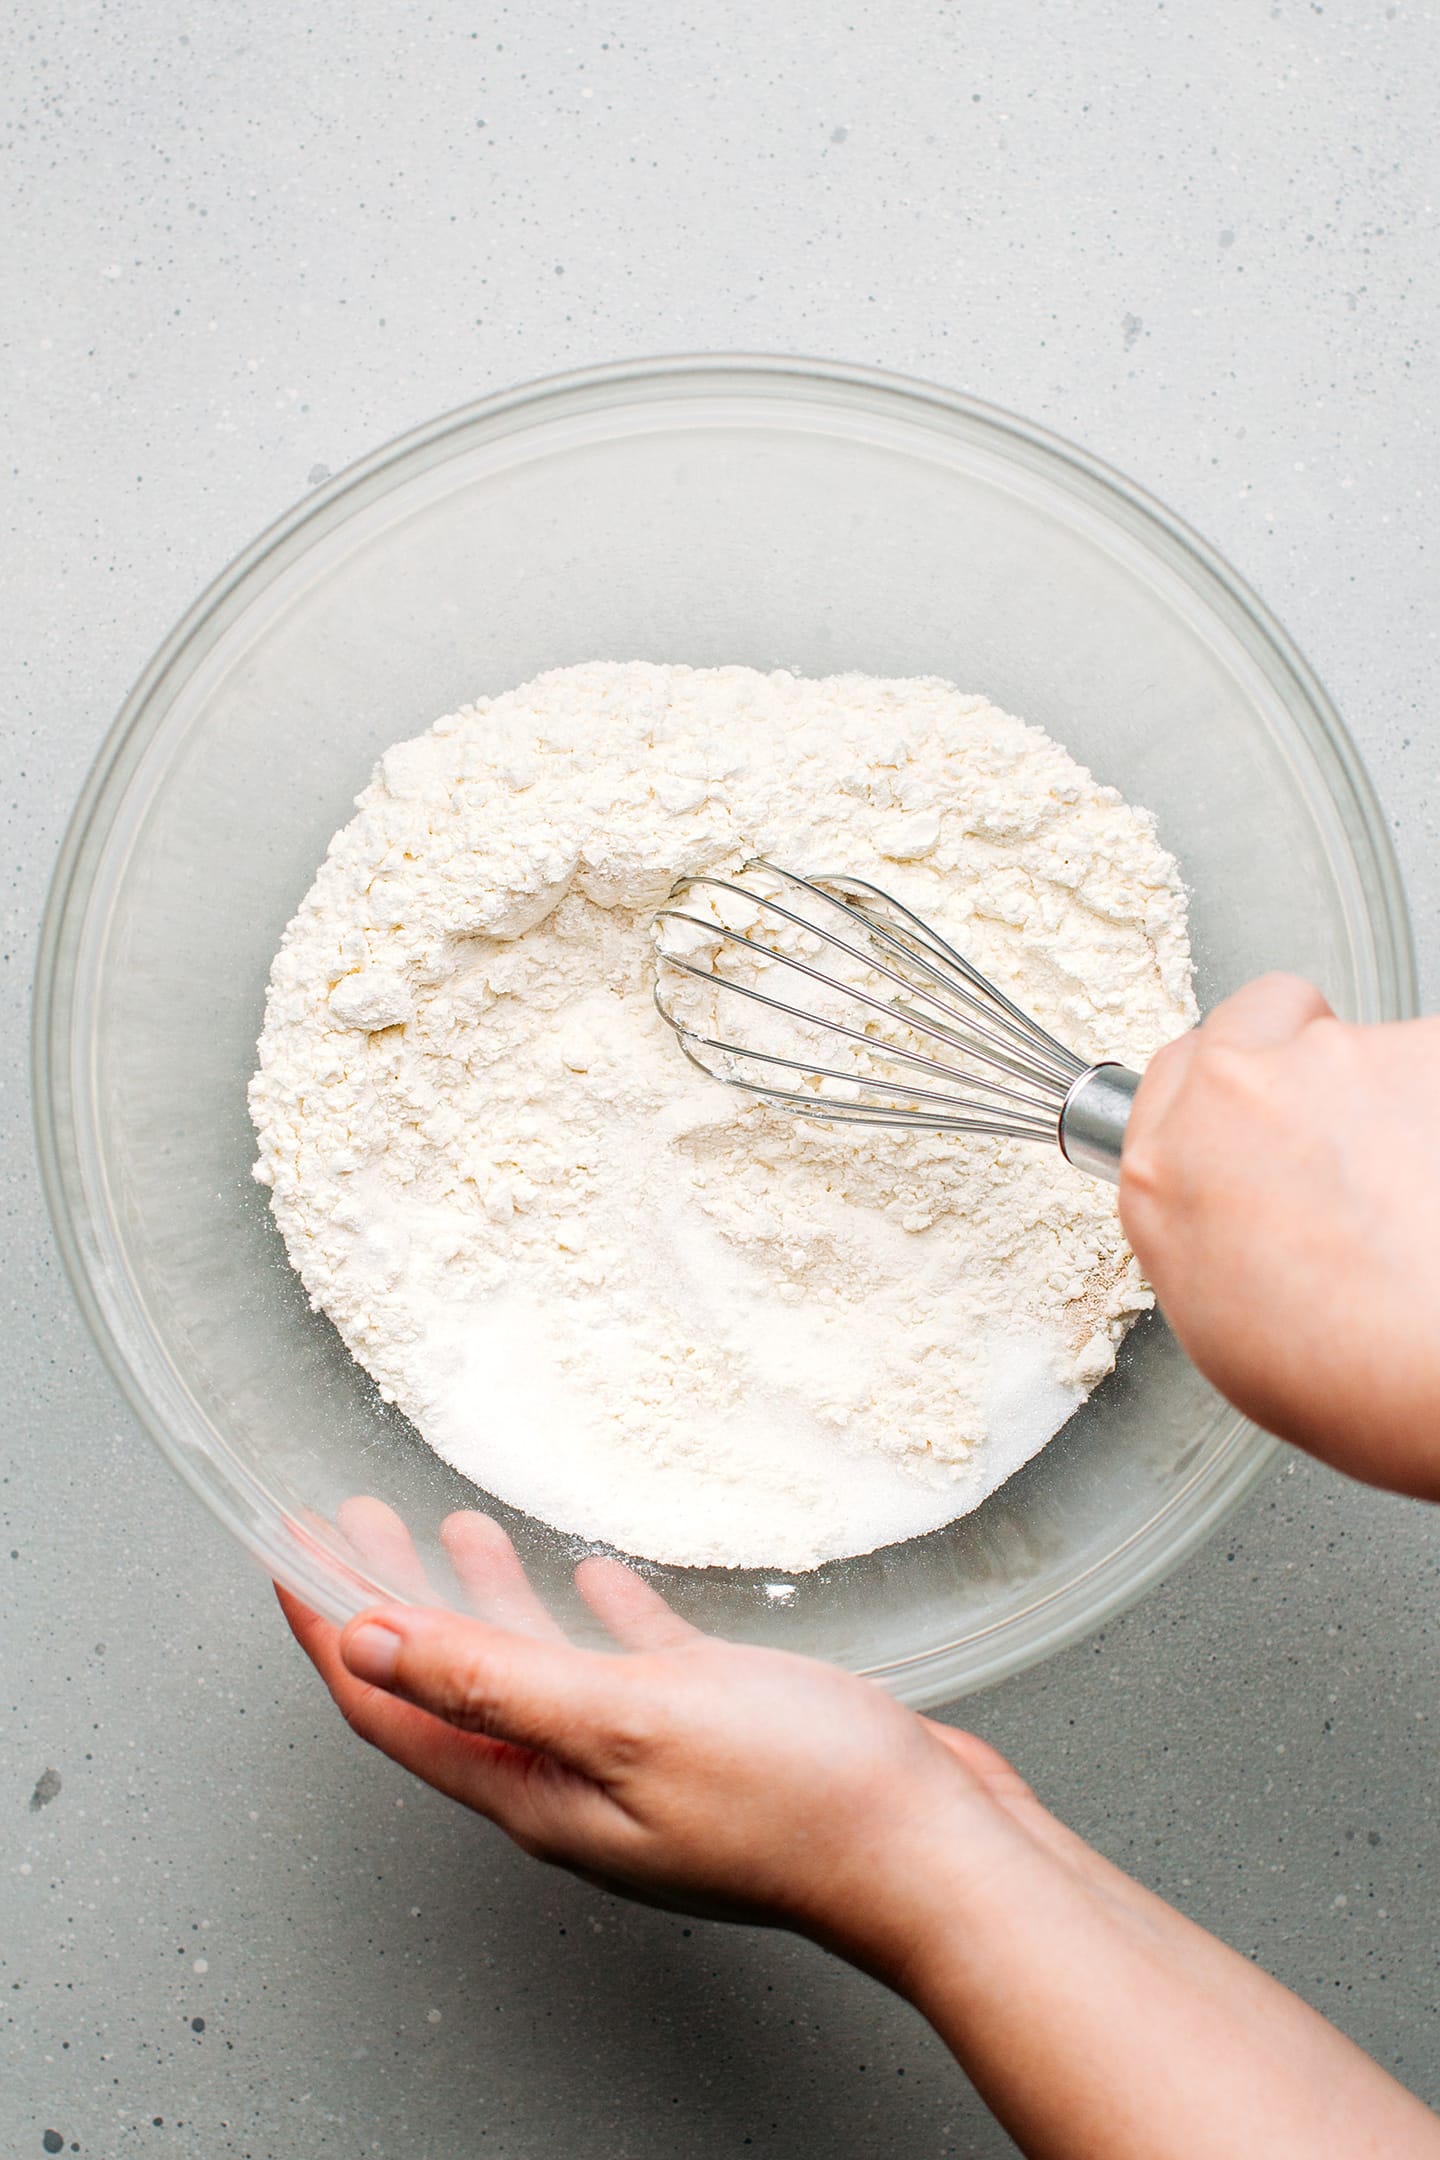 Whisking flour, sugar, and yeast in a mixing bowl.